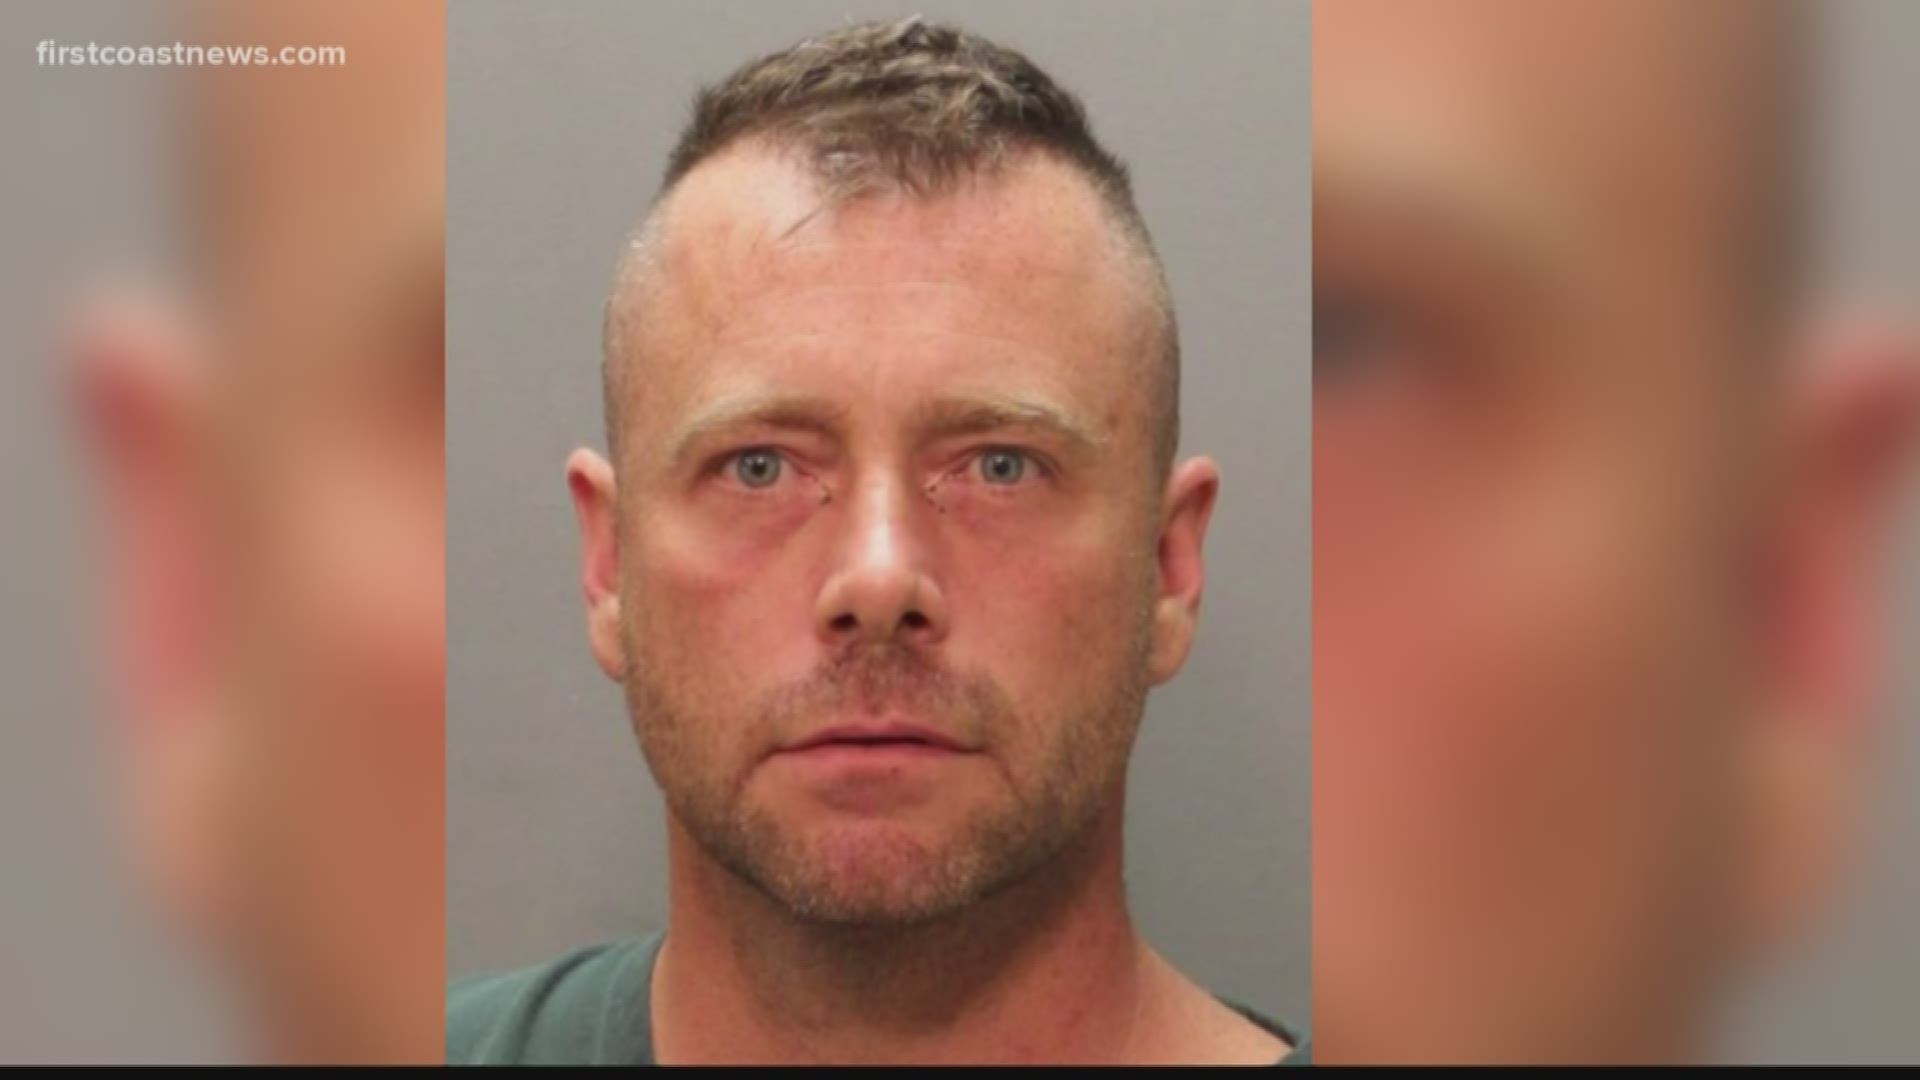 Police say 42-year-old Columbus Donovan Jeffrey uploaded several images of child porn onto the social media site, Tumblr.